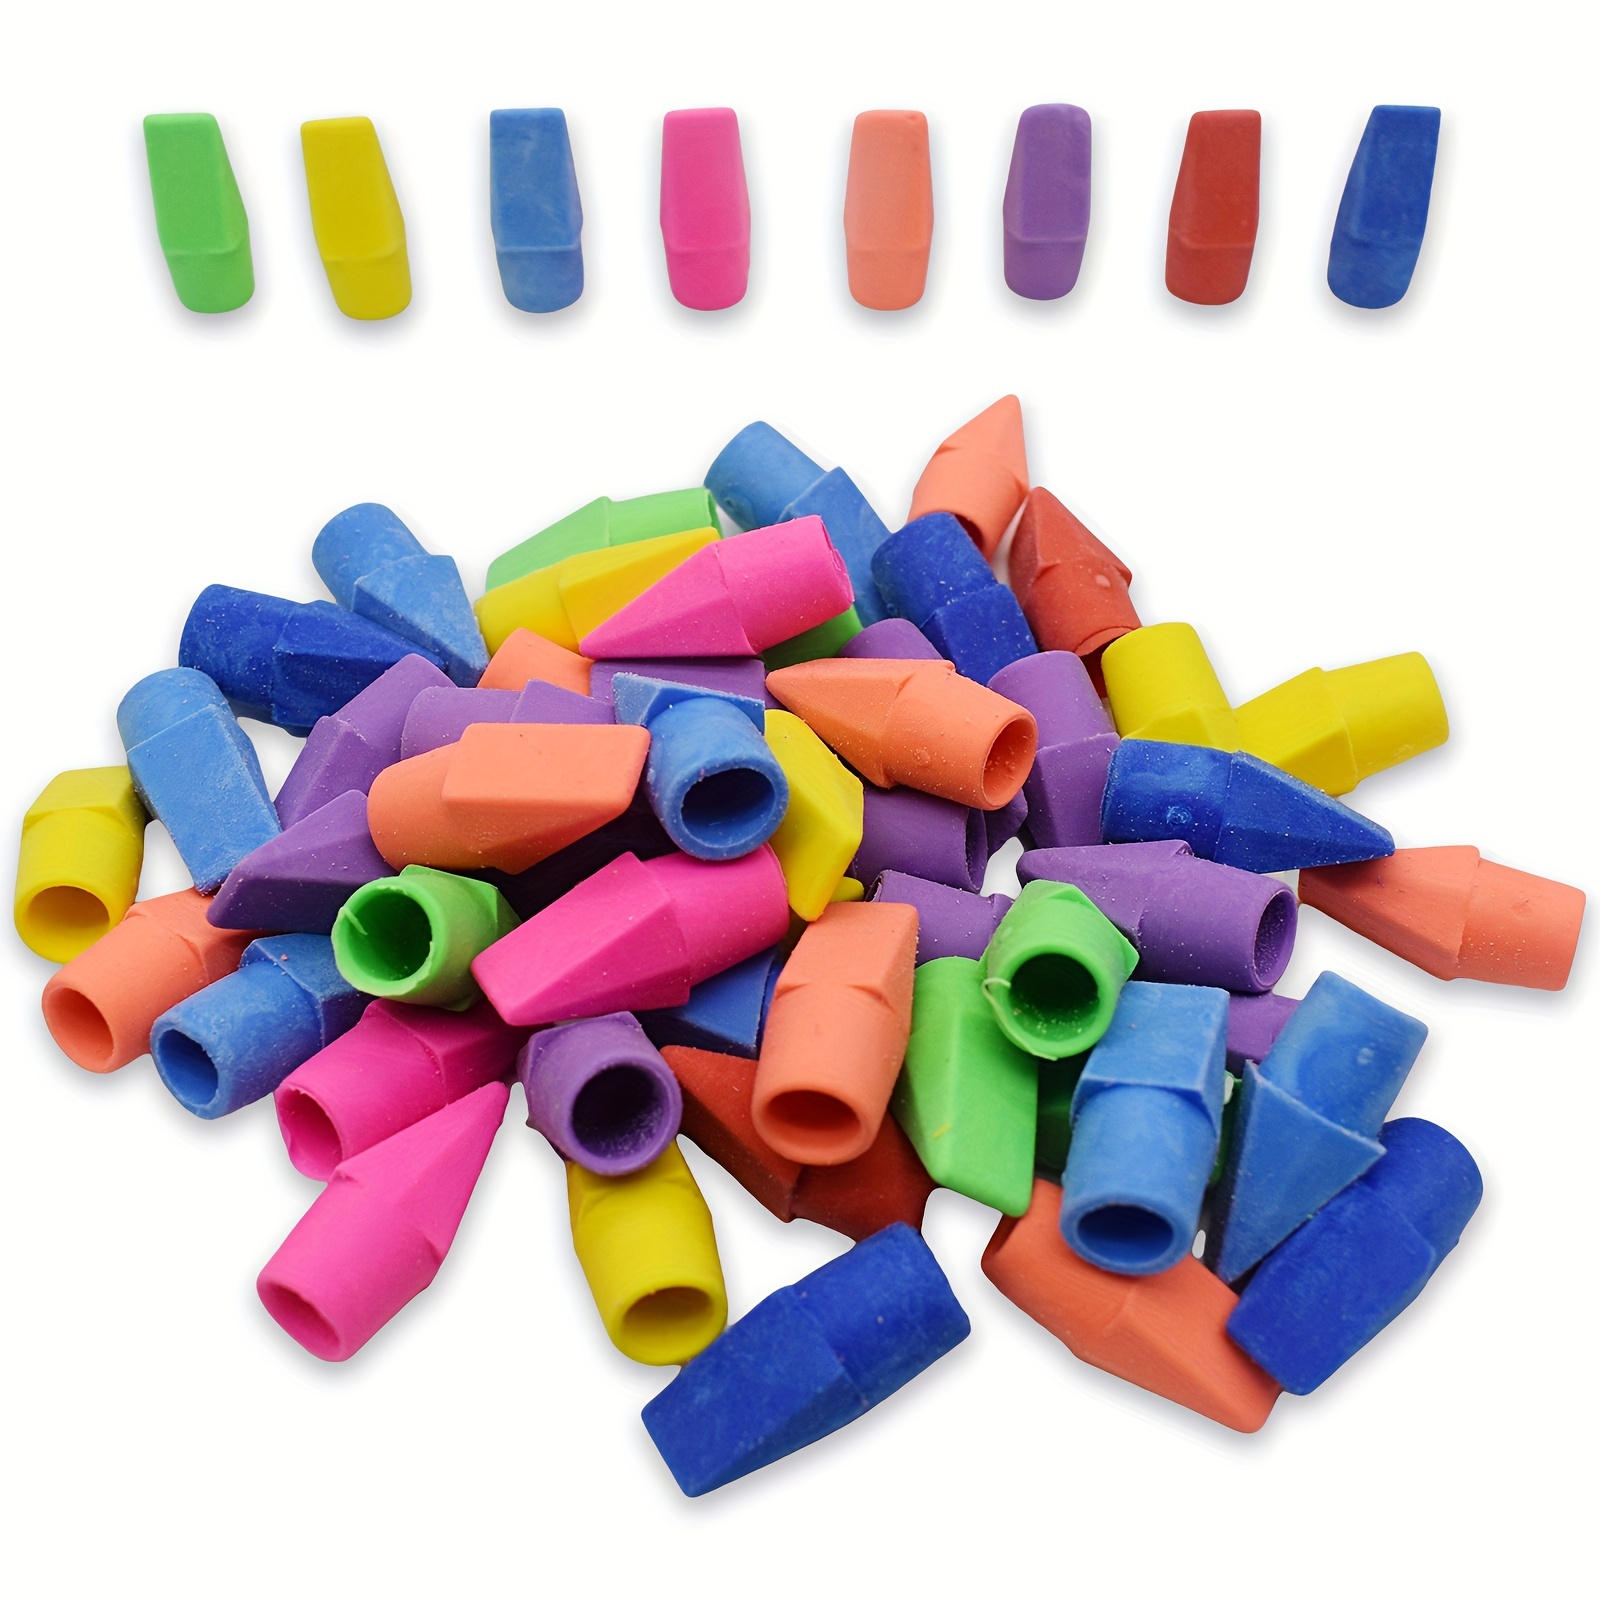 Mr. Pen- Pencil Erasers Toppers, 120 Pack, Erasers for Pencils, Pencil Top Erasers, Pencil Eraser, Eraser Pencil, Pencil Cap Erasers, Eraser Caps